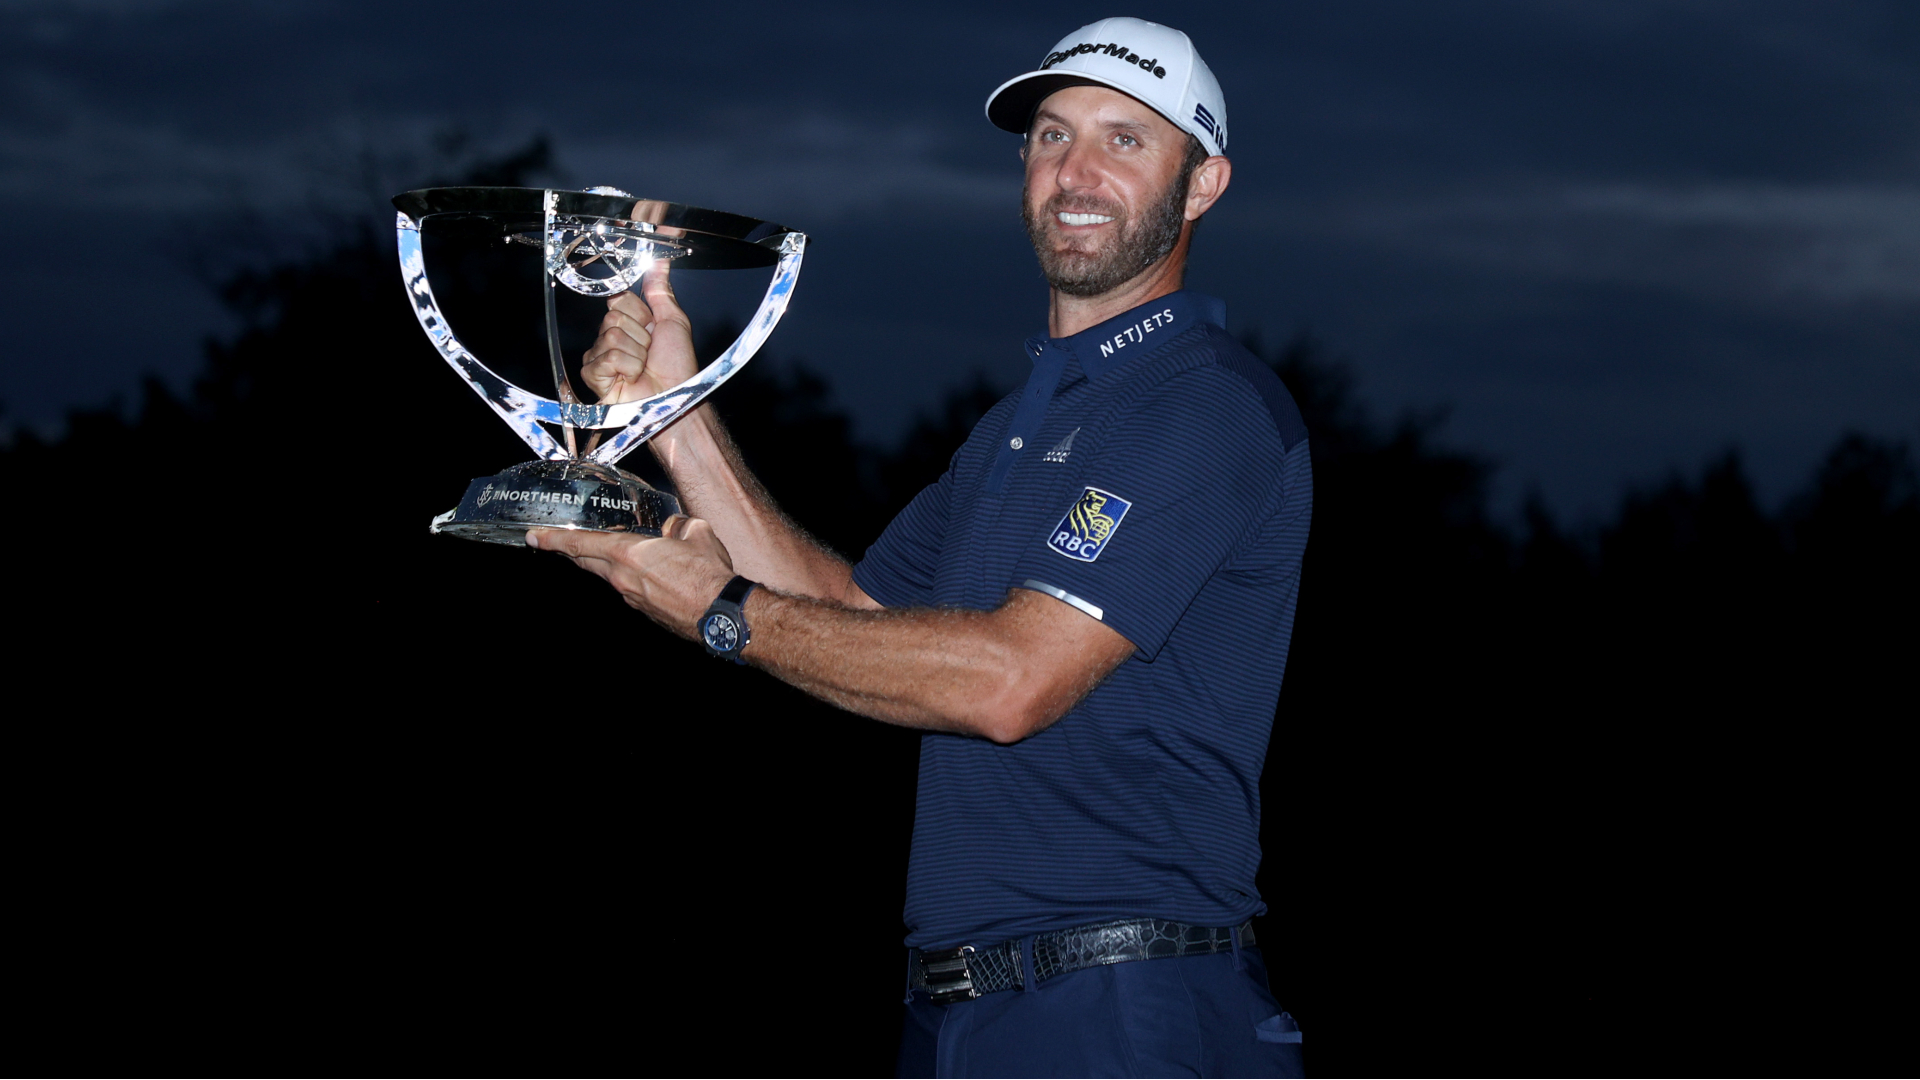 Dustin Johnson finishes at 30 under, wins by 11 at Northern Trust.